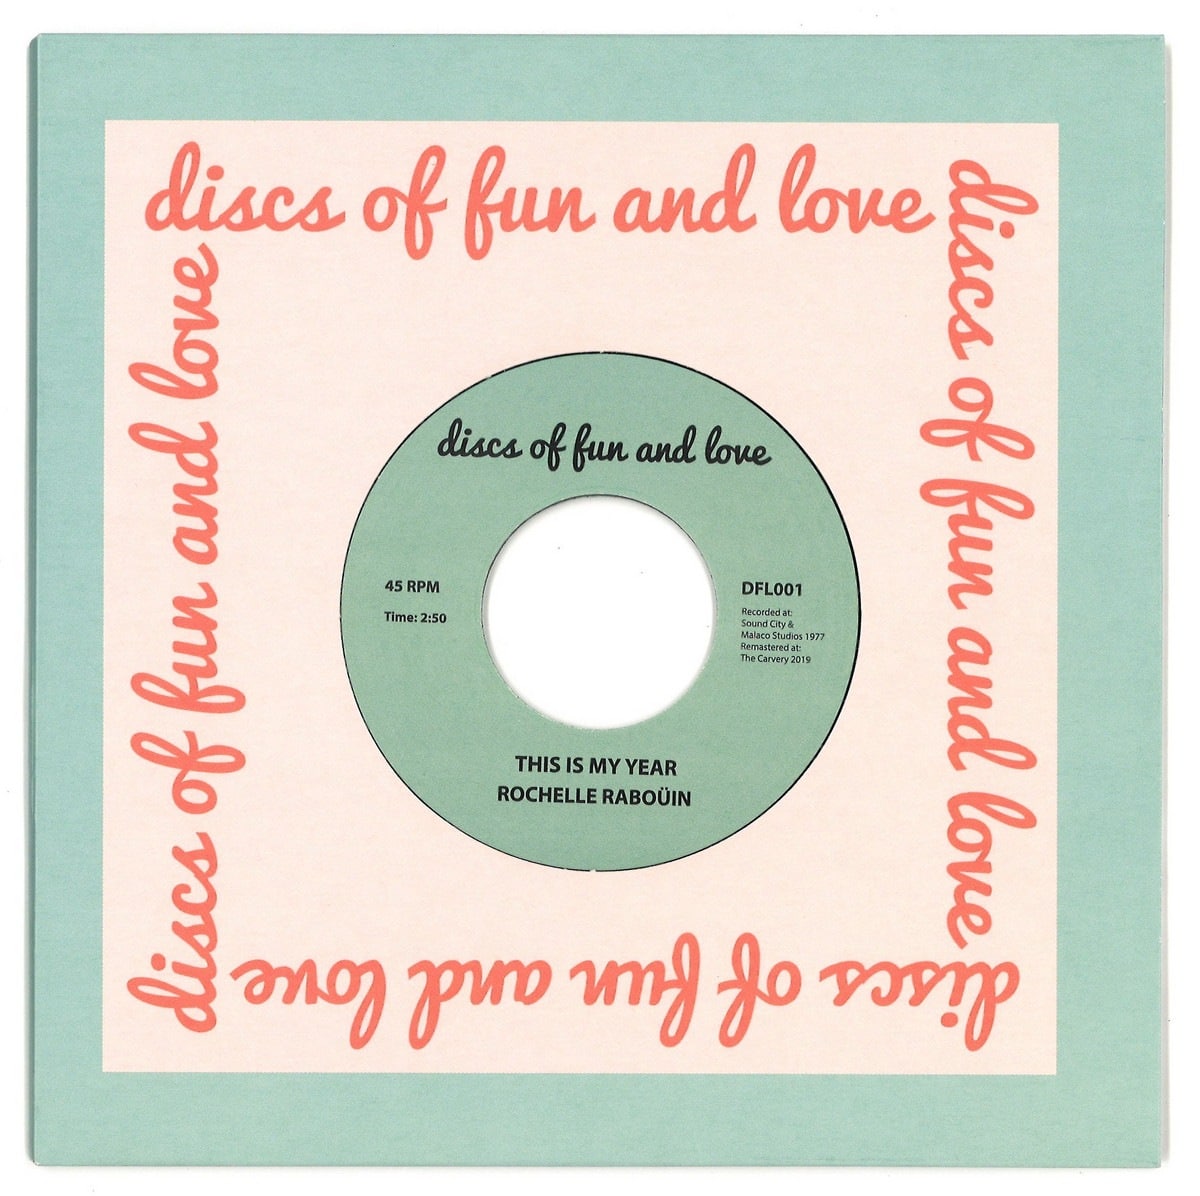 Rochelle Rabouin - This Is My Year - DFL001 - DISCS OF FUN OF LOVE